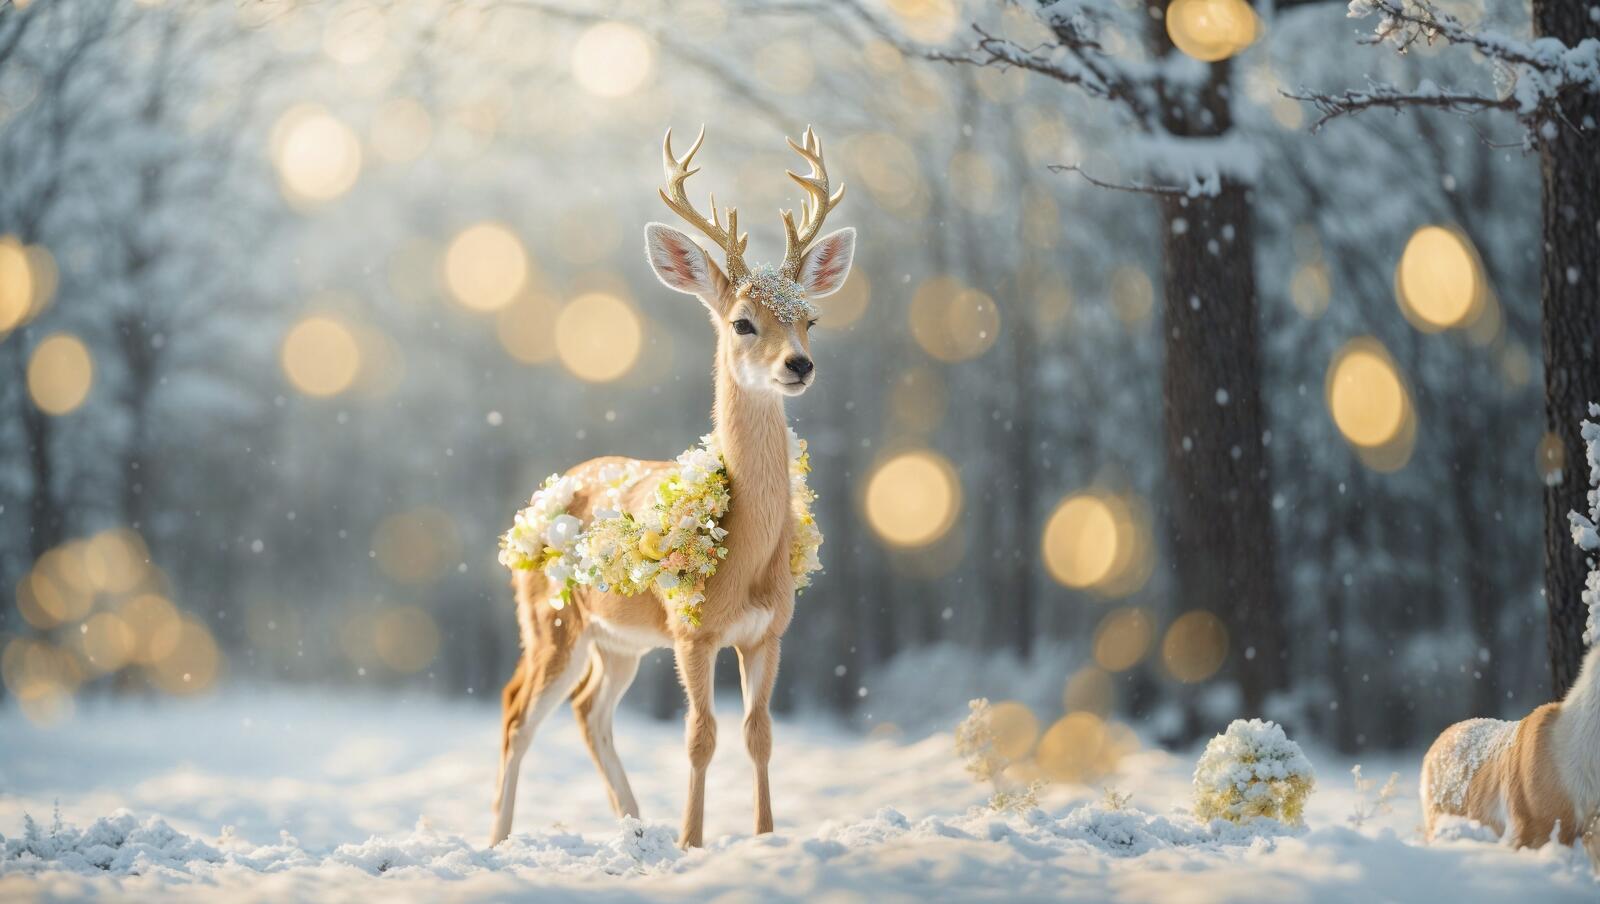 Free photo Reindeer in the snow with wreath decoration